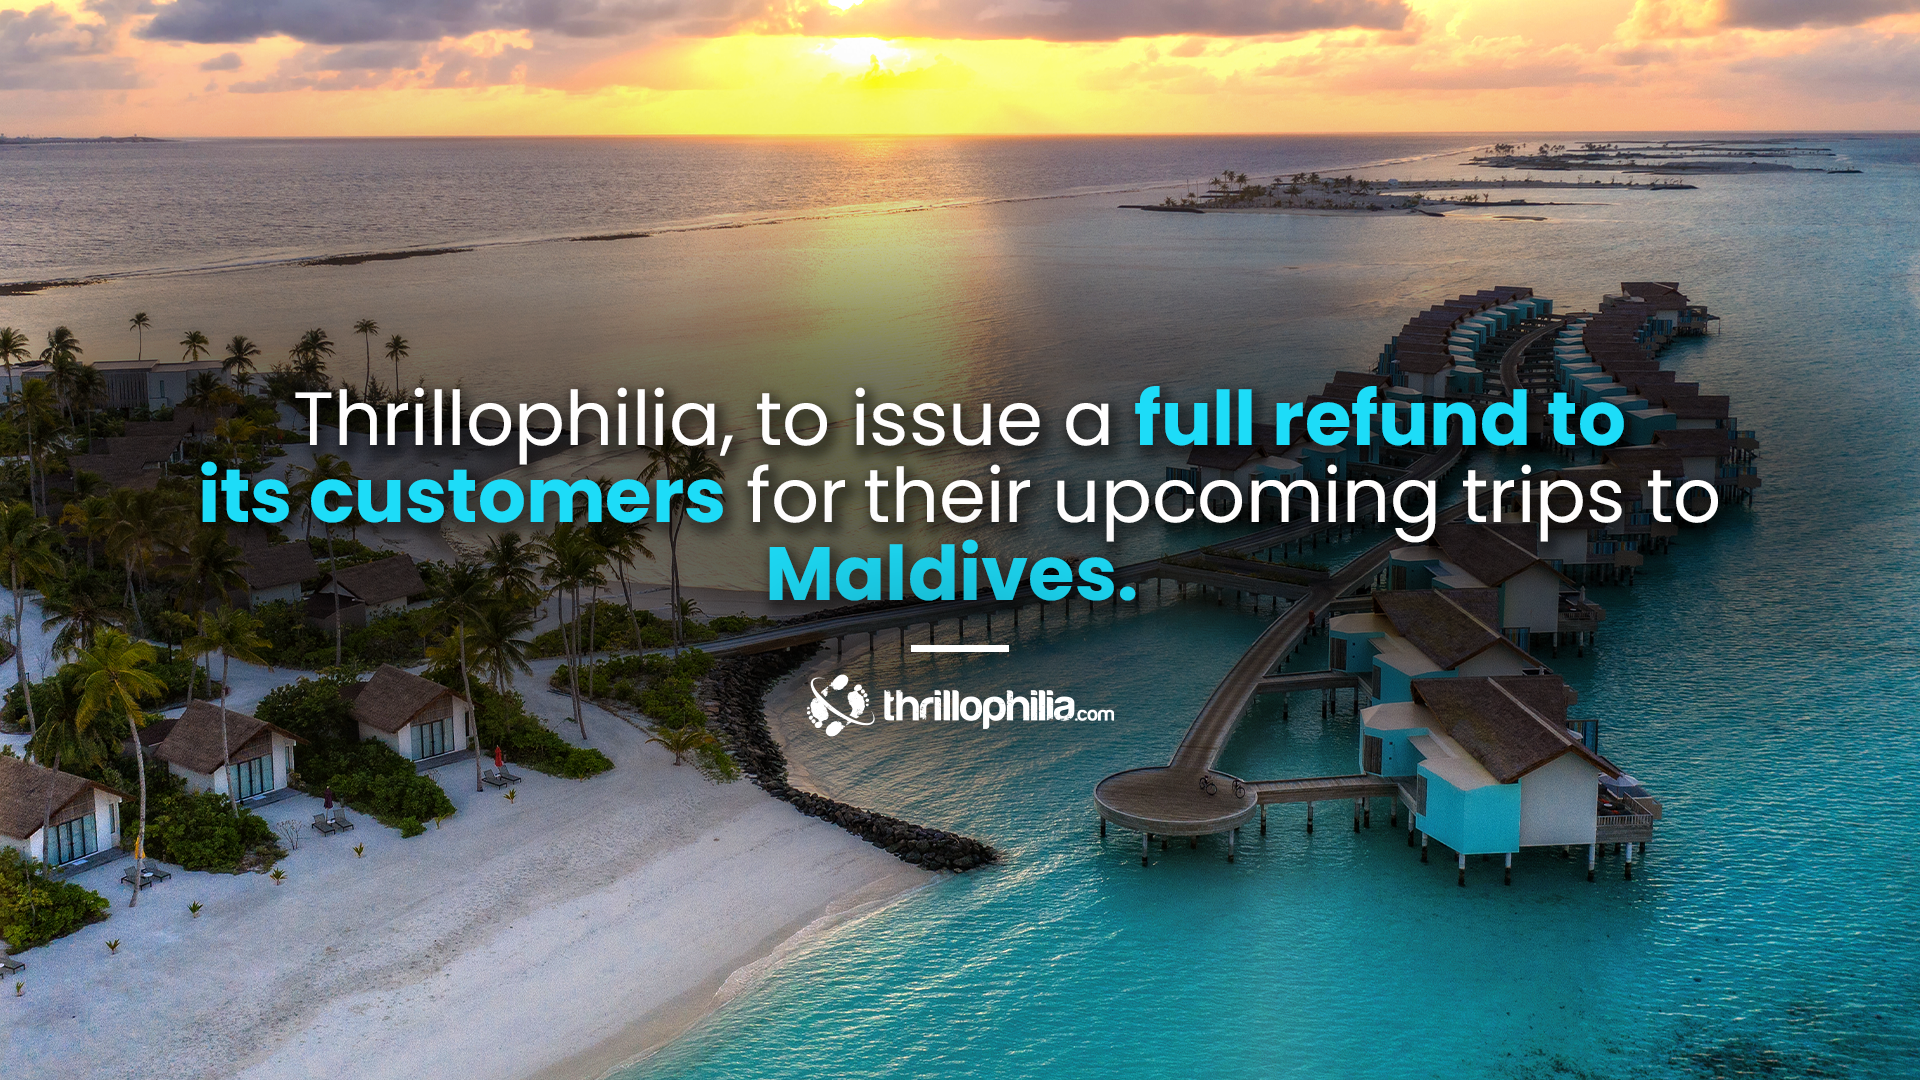 Thrillophilia, to issue a full refund to its customers for their upcoming trips to Maldives.